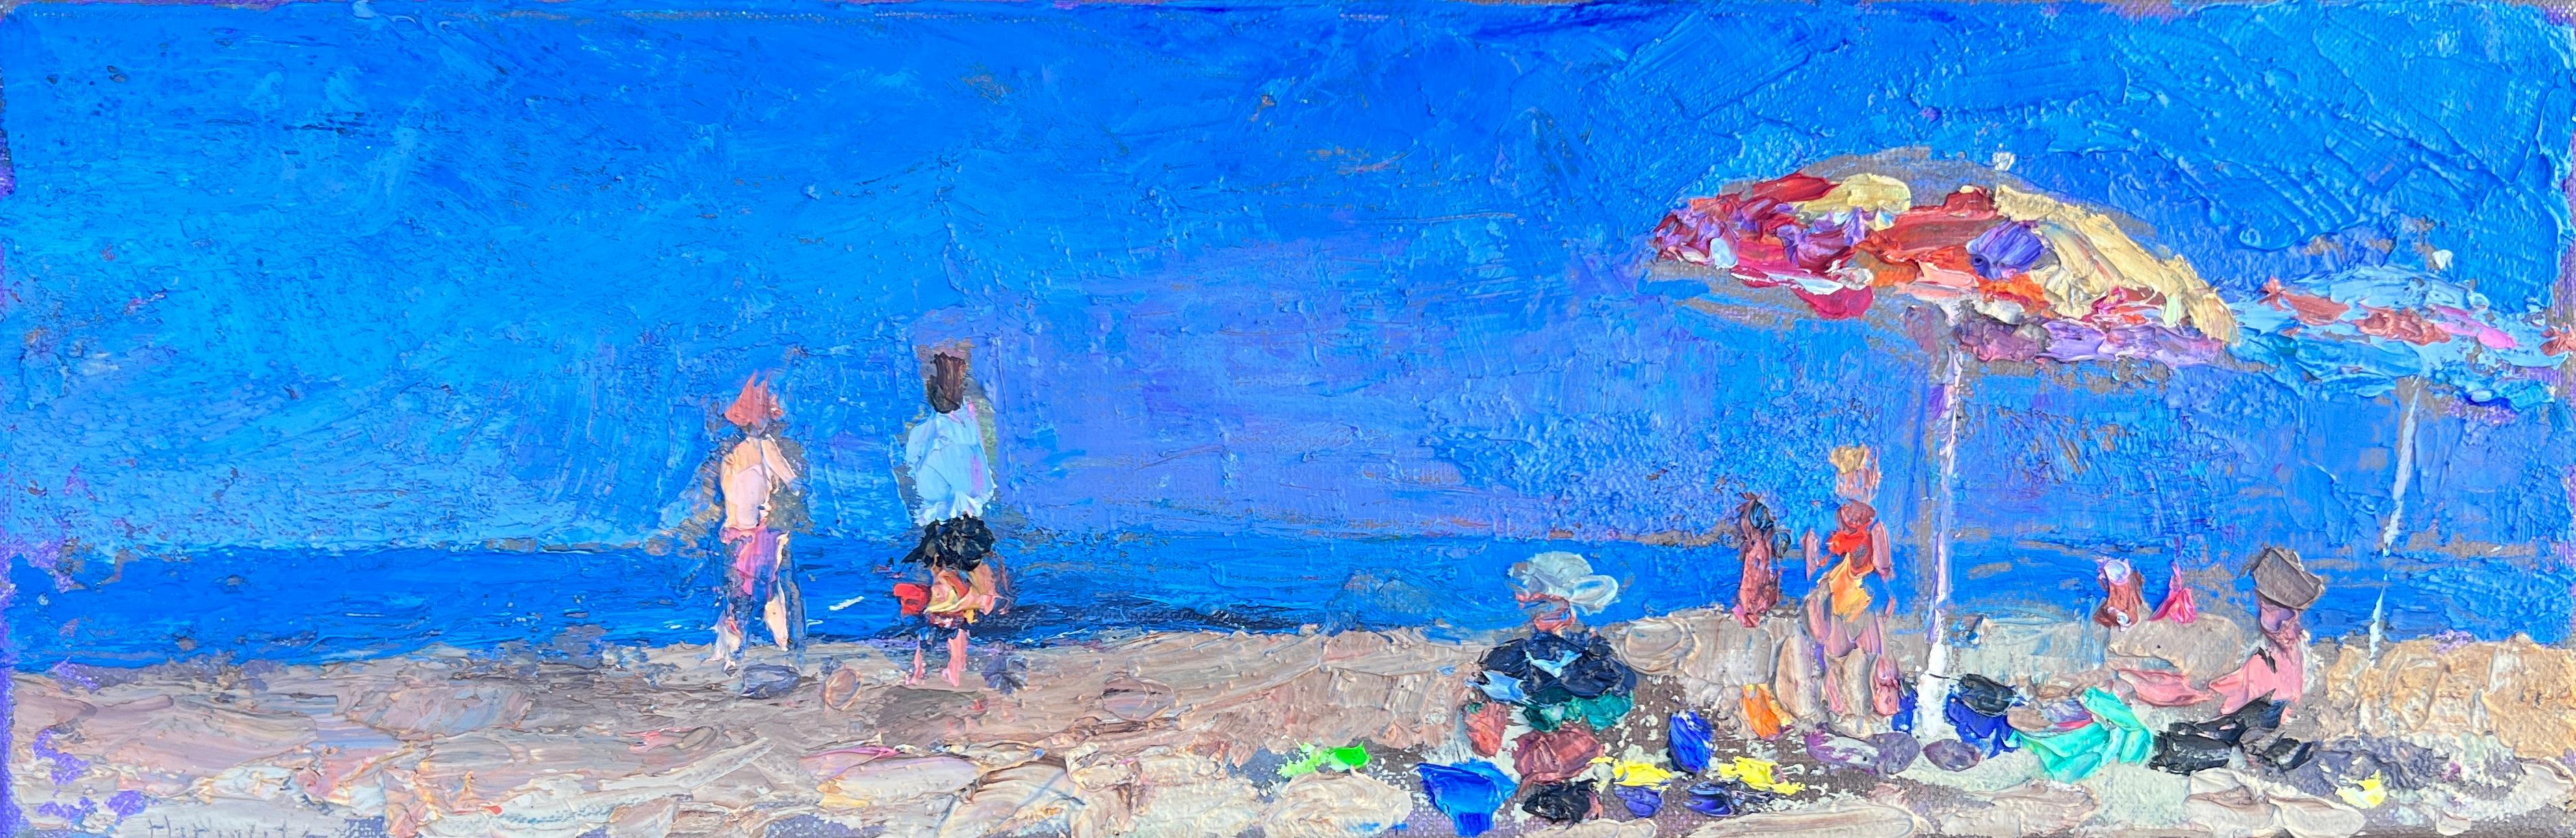 Larry Horowitz Landscape Painting - "Day Glow Light" panoramic oil painting of people on a beach with blue sky